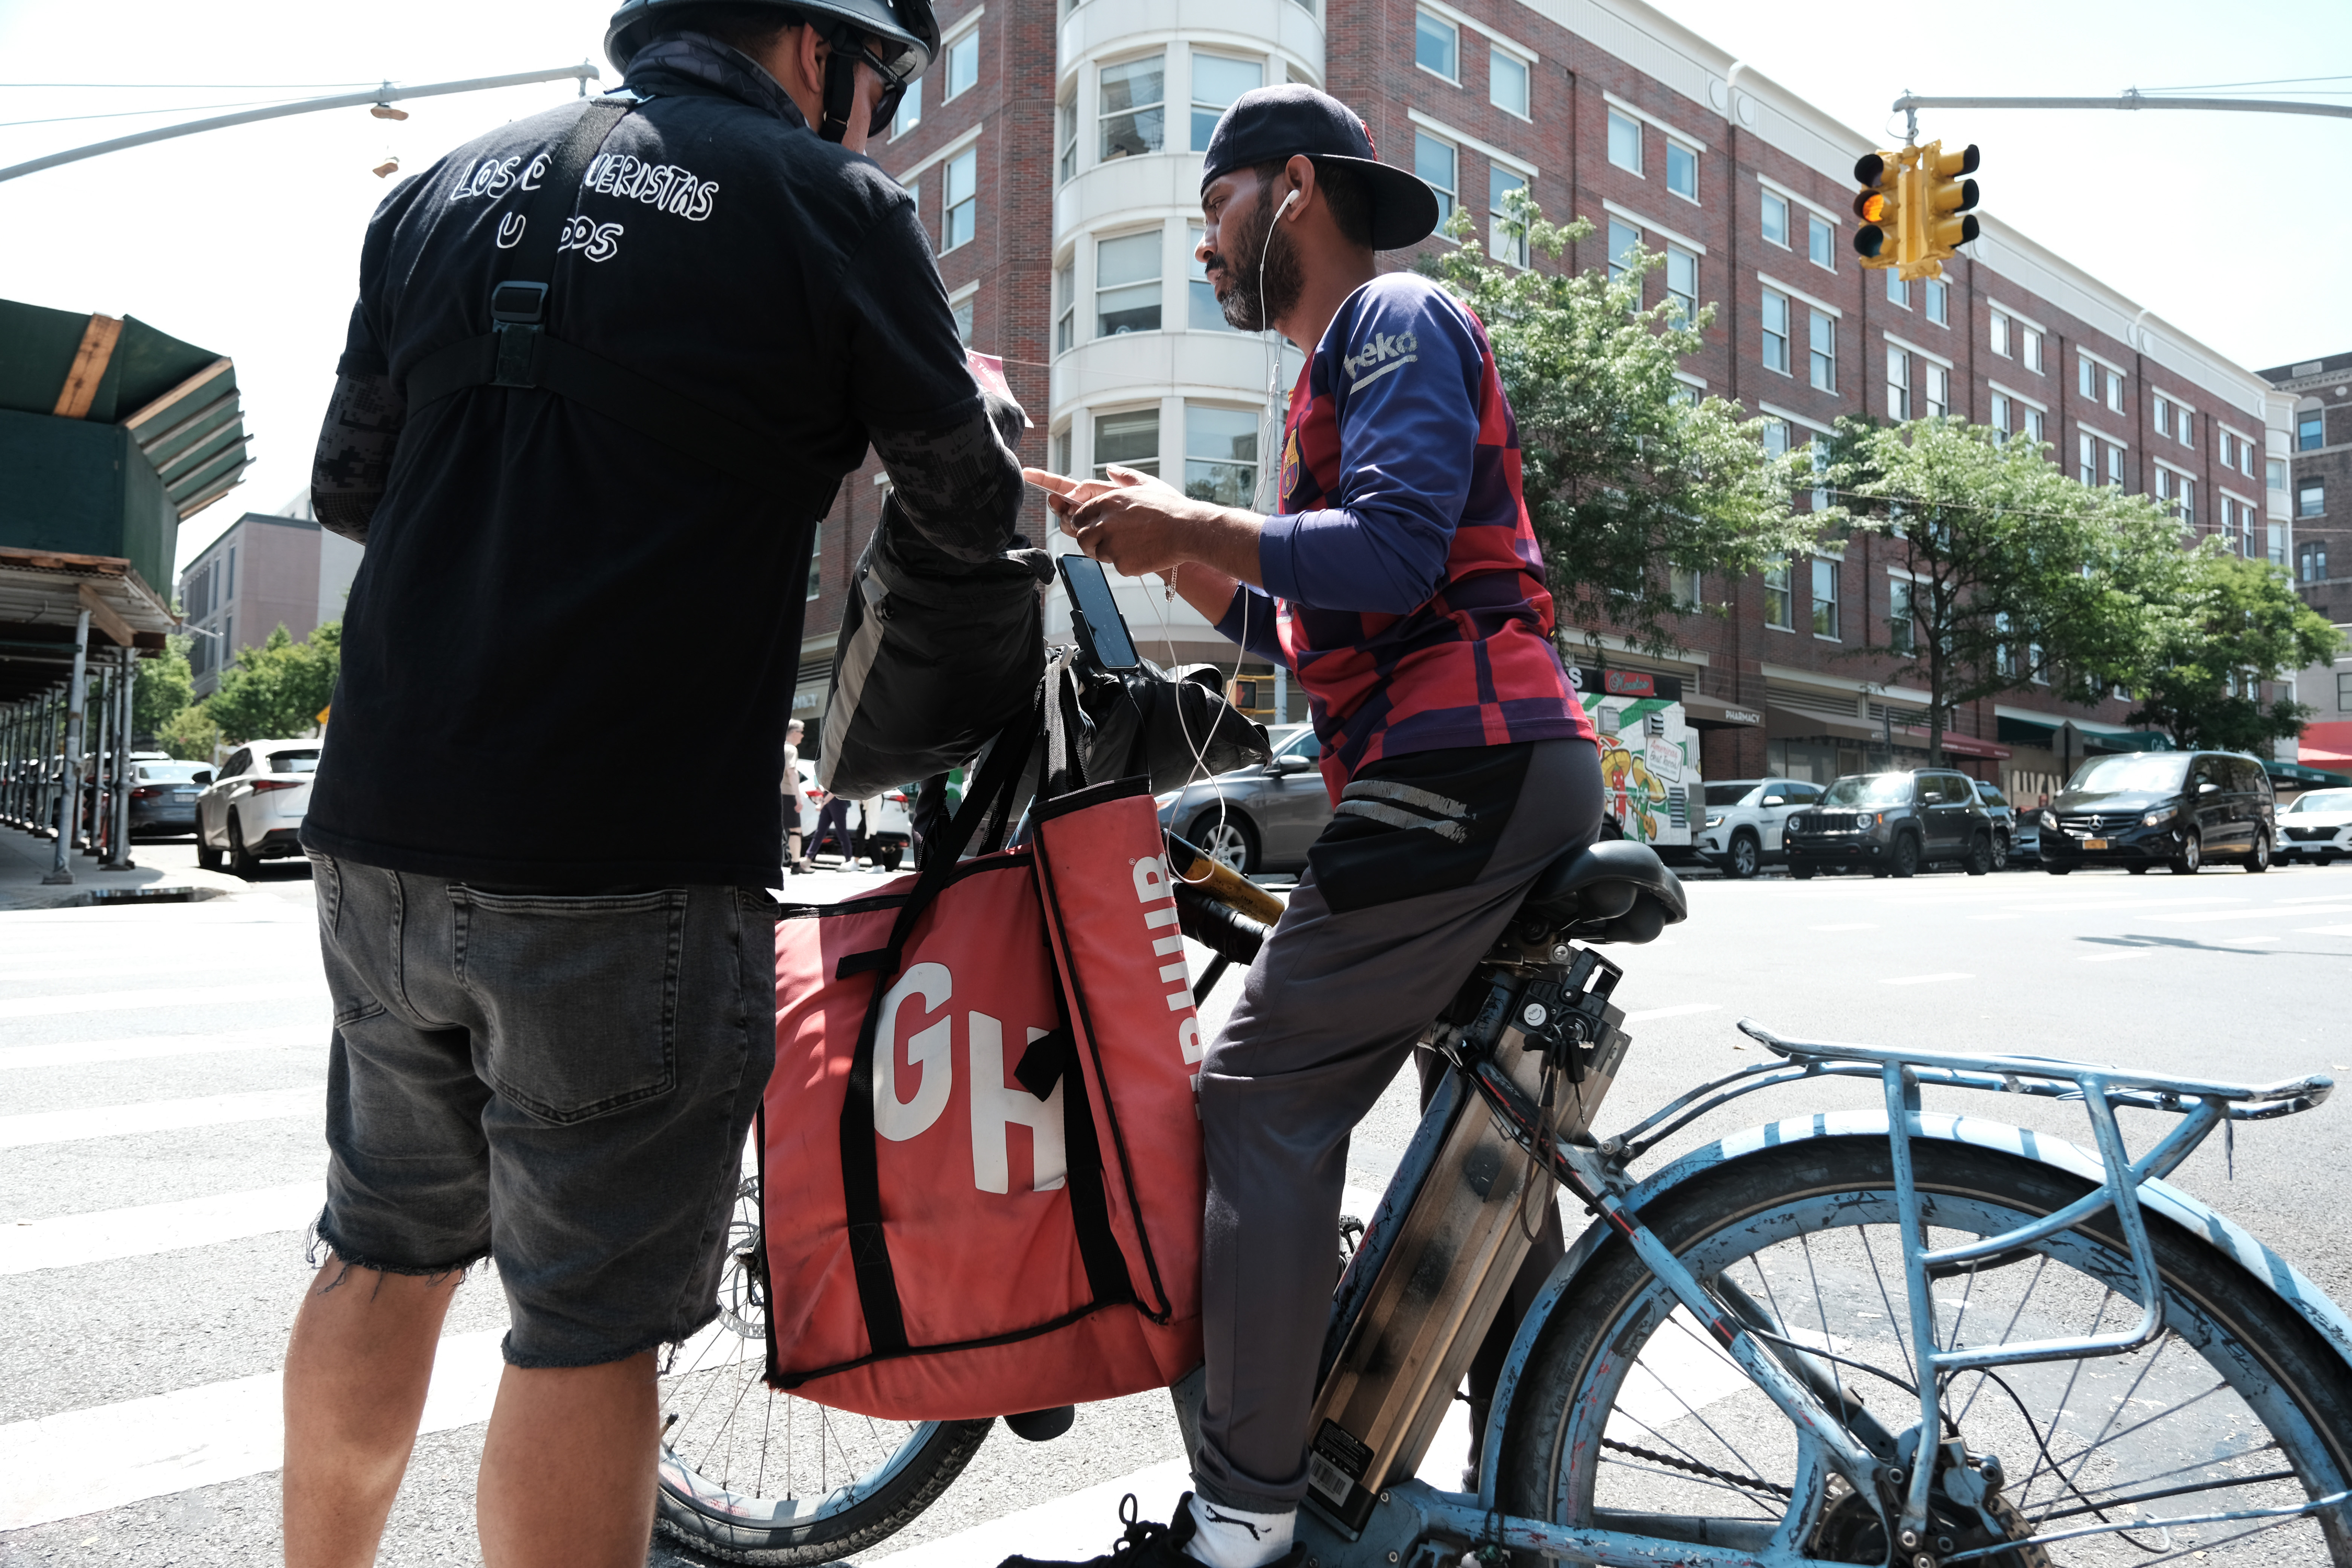 DRIVE TIME: NYC app delivery workers more likely to be hurt, assaulted on job, survey shows